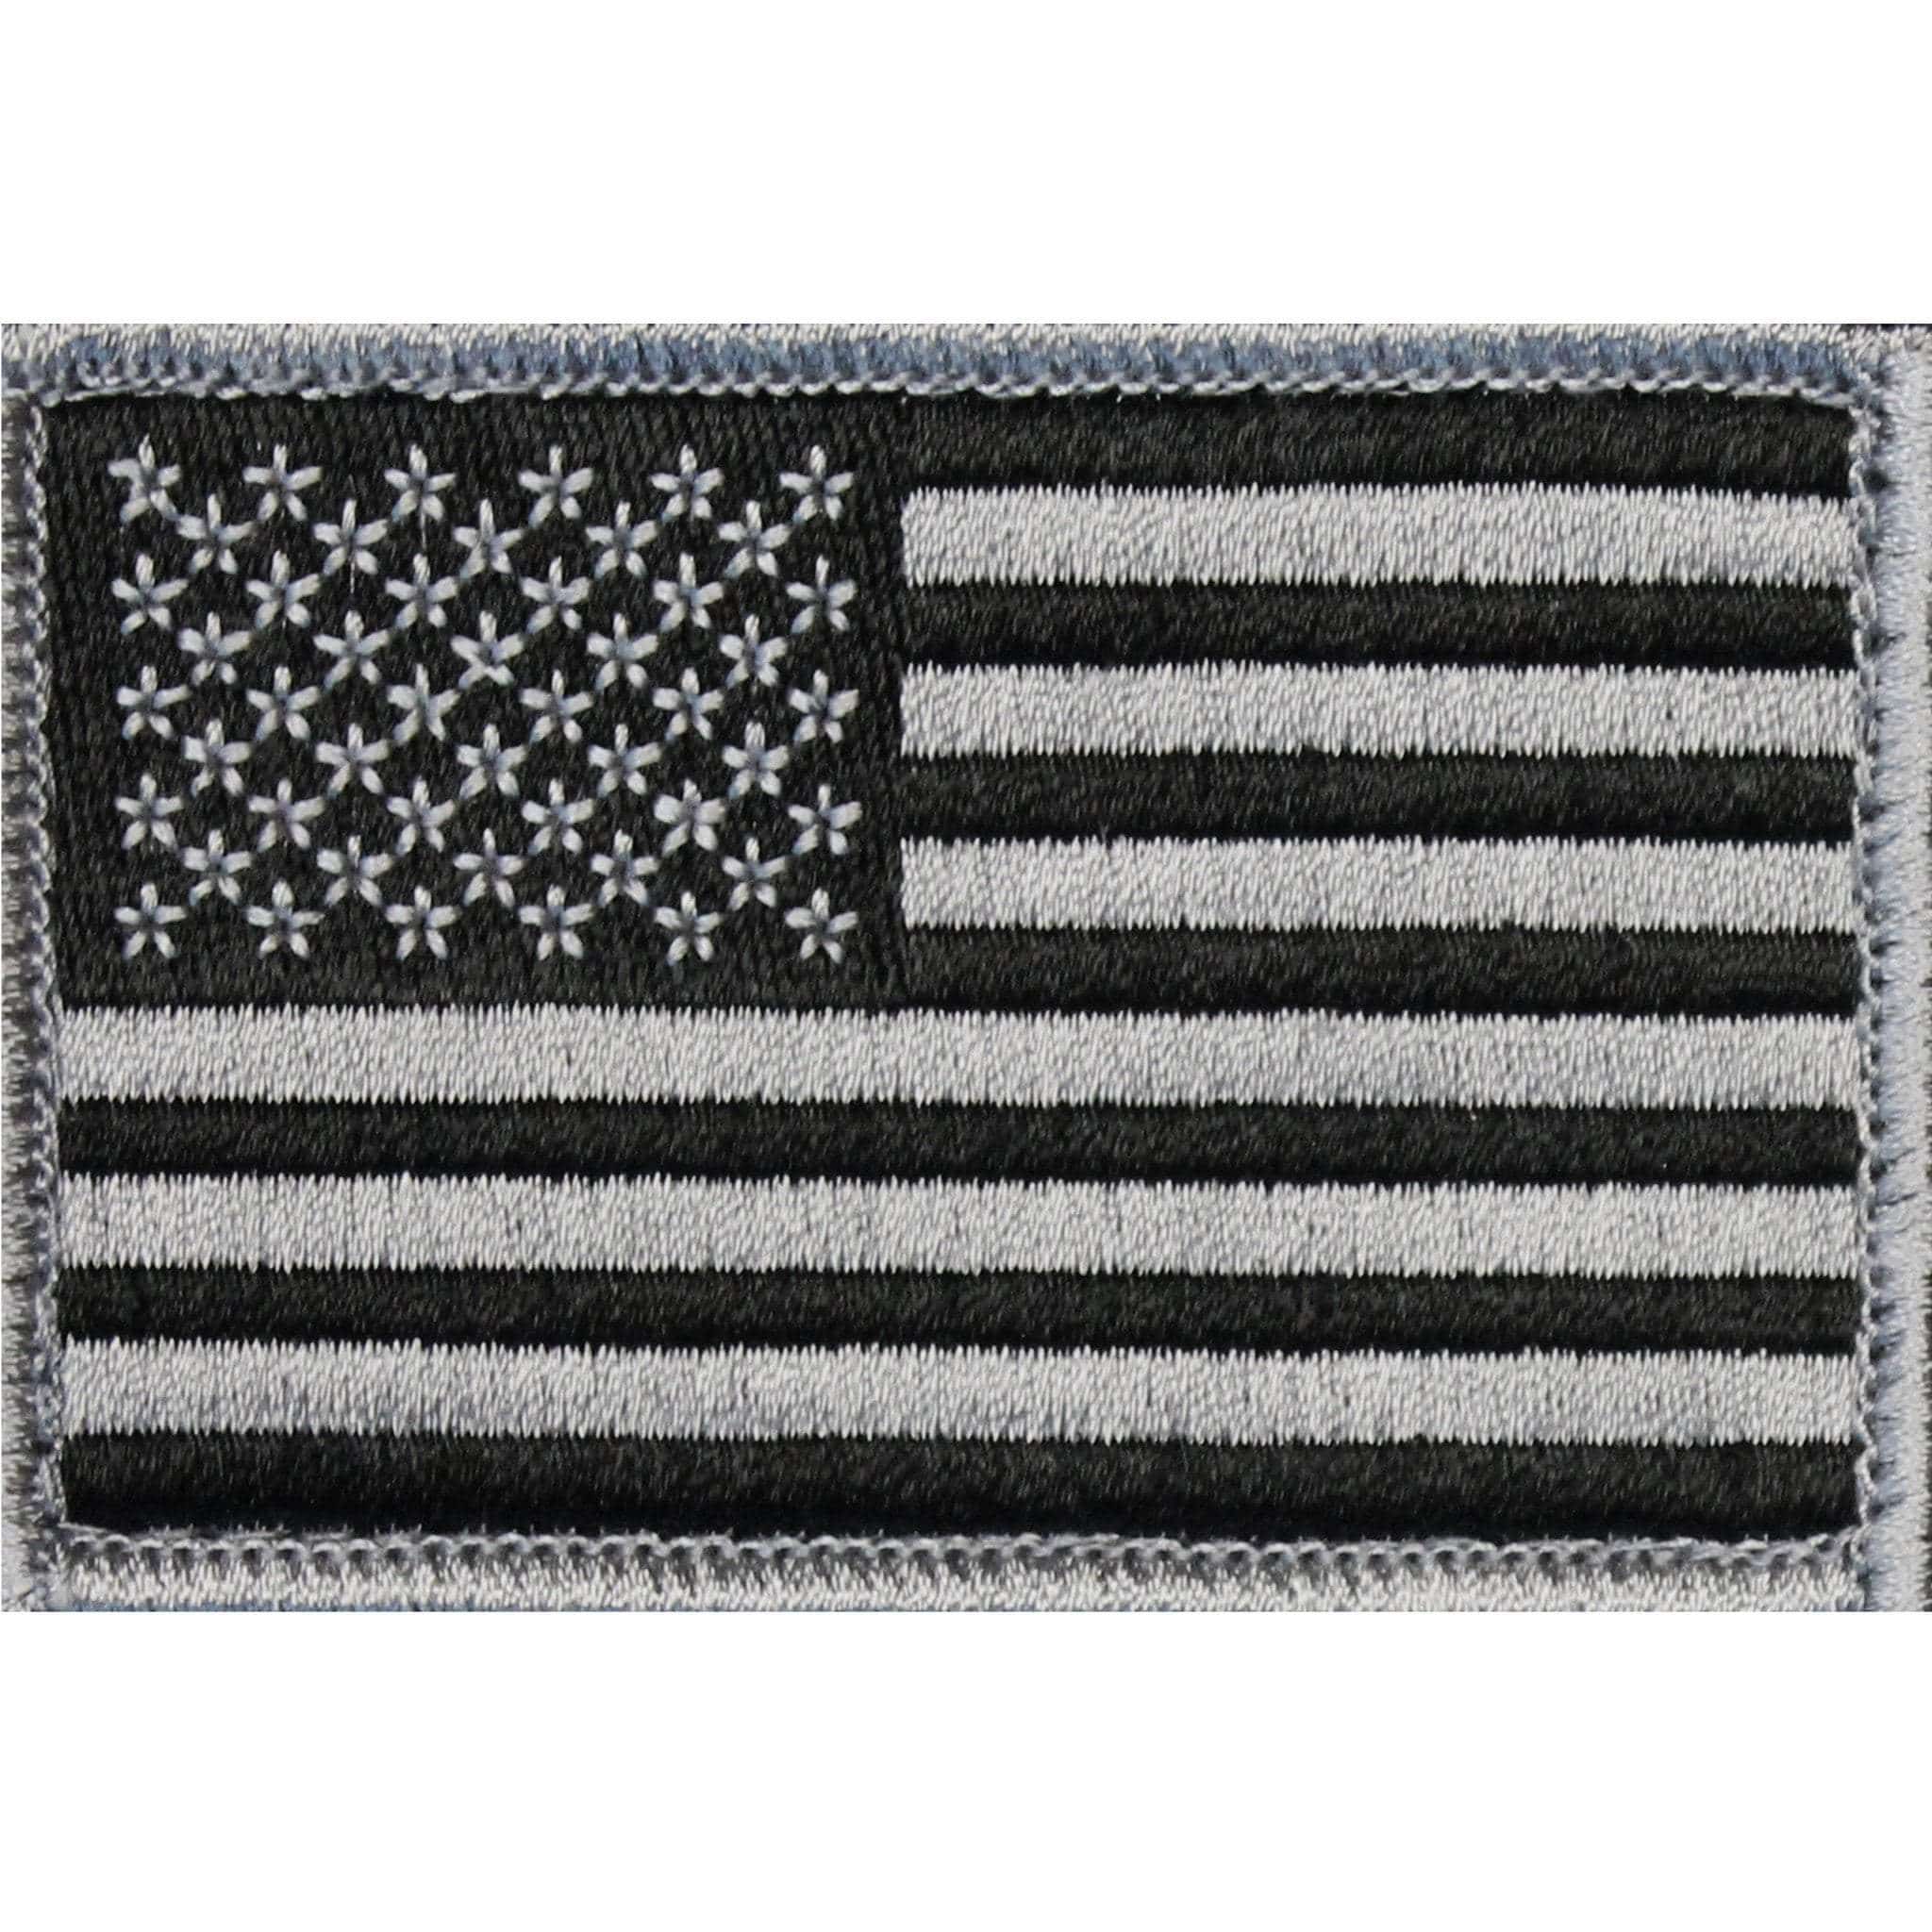 Bartact Black / Silver Stars on Right Thin Red Line, Size: One Size